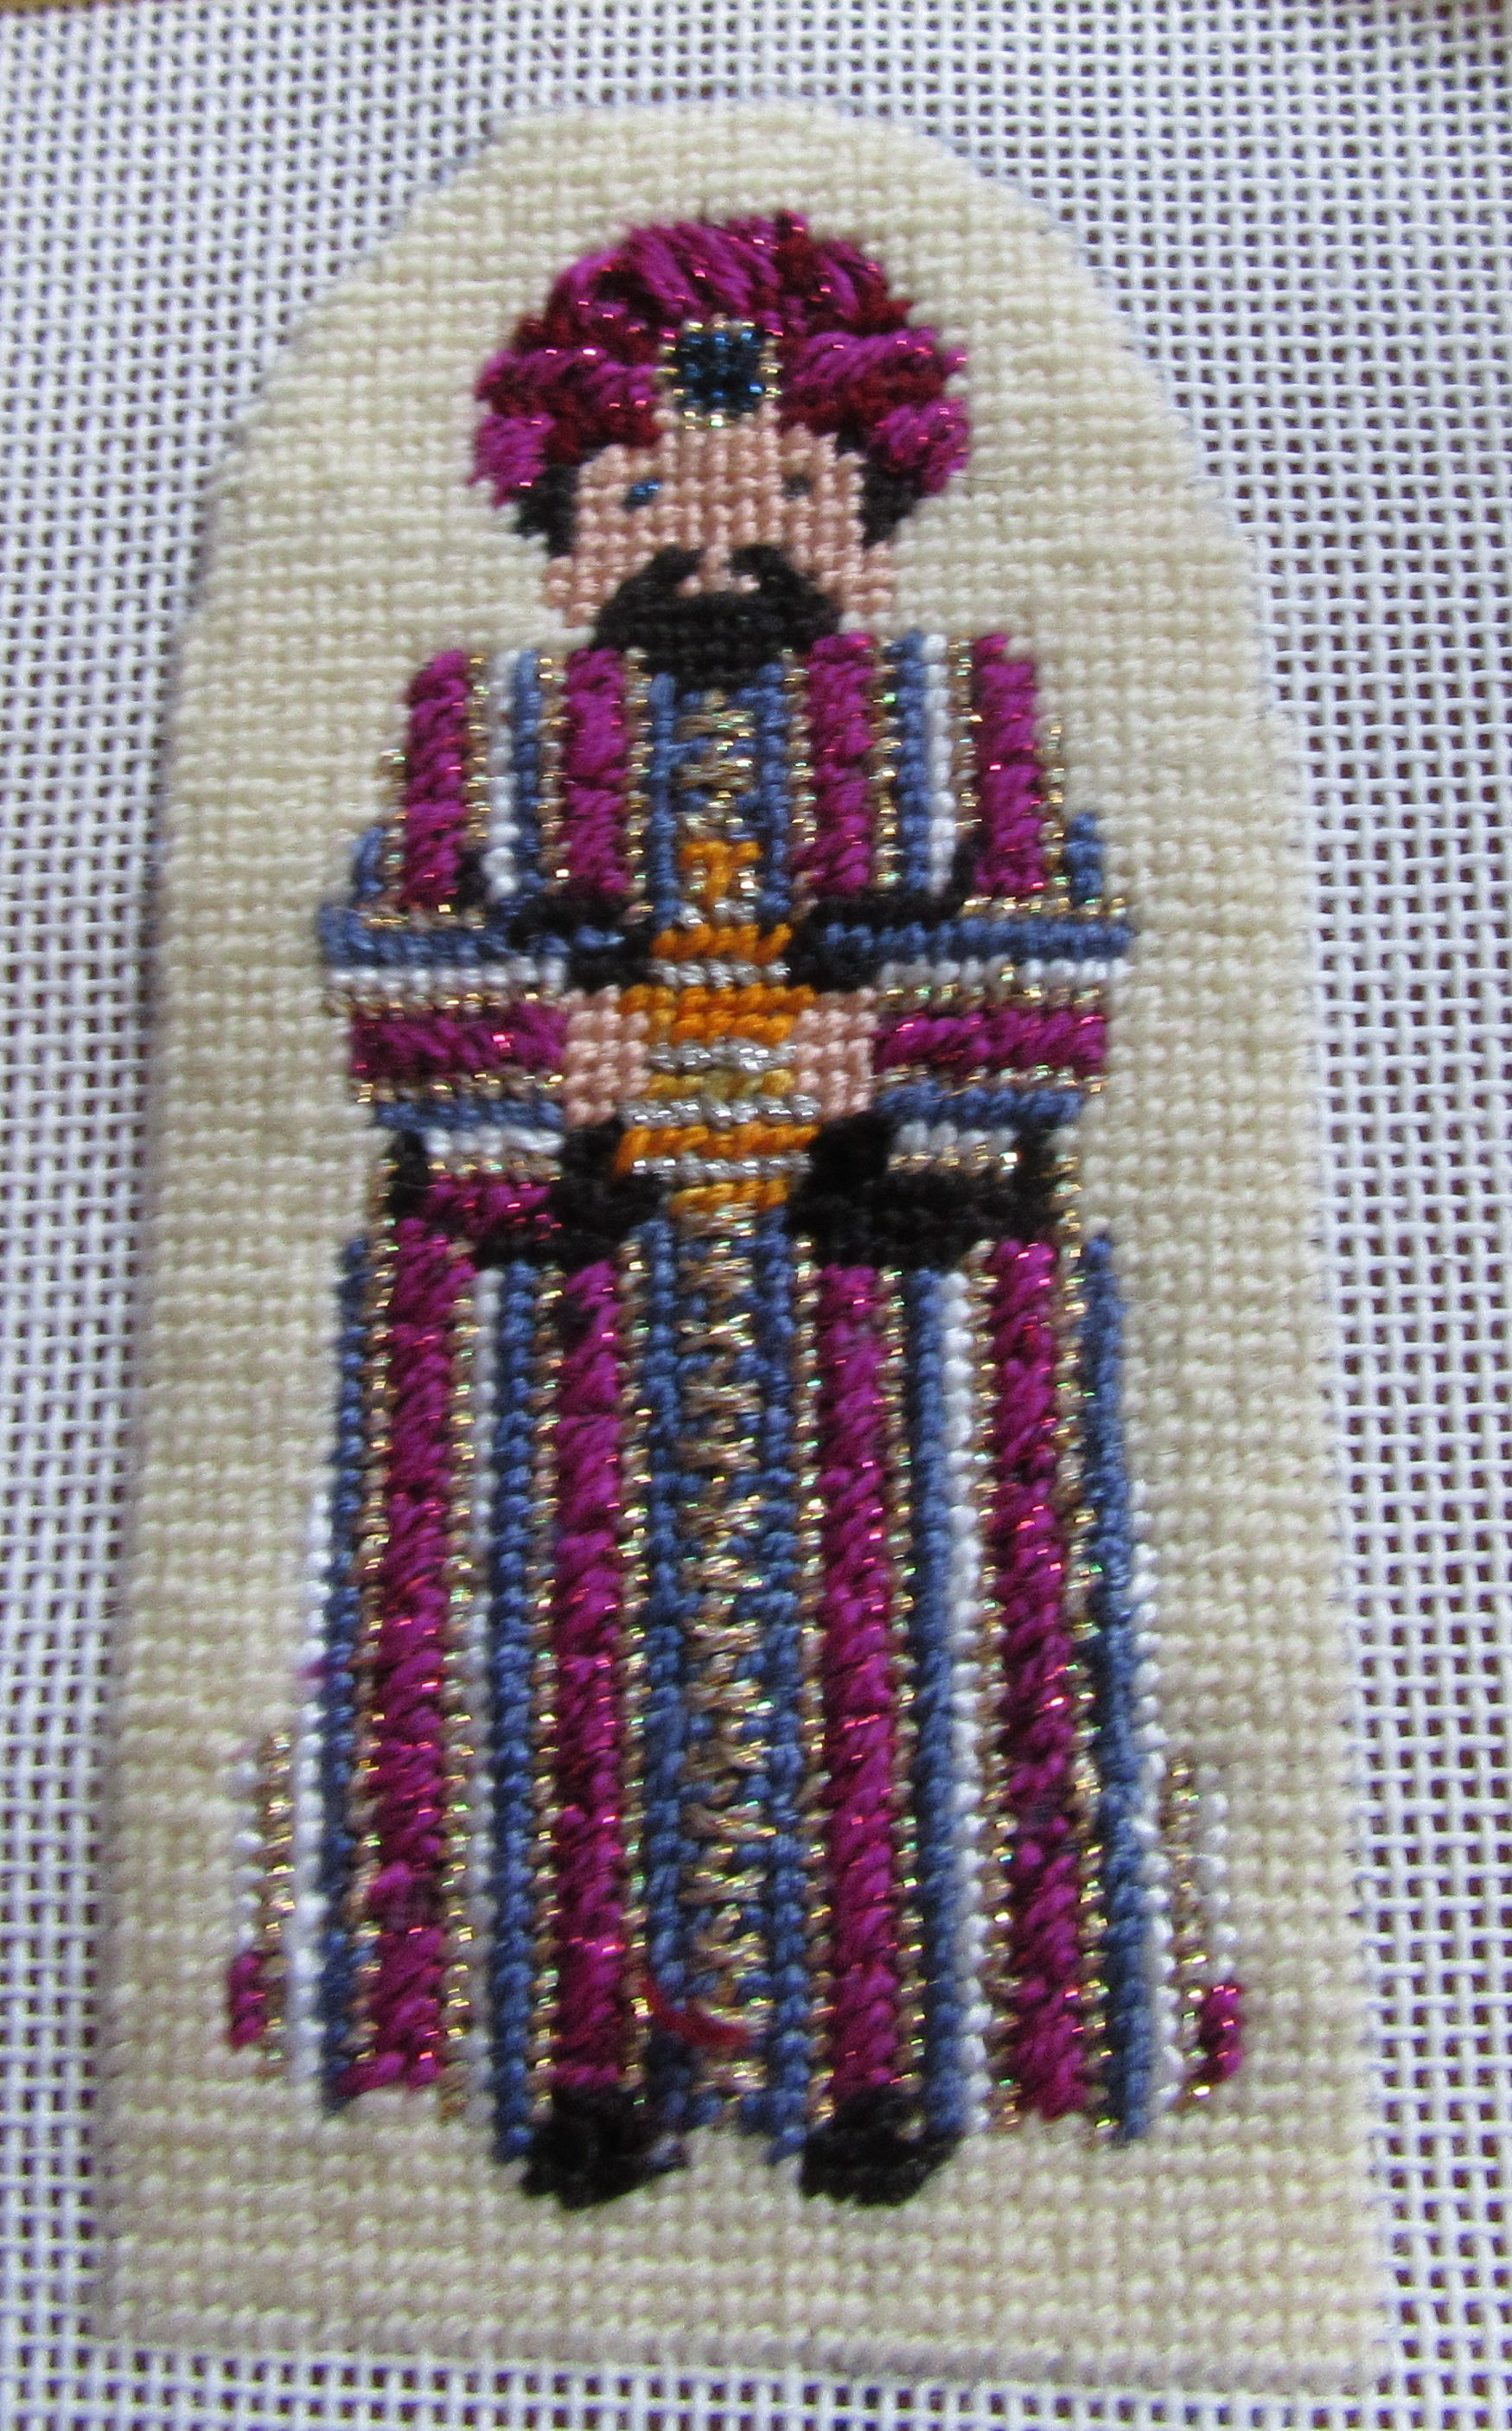 Bead Embroidery Stitch Samples - Nuts about Needlepoint